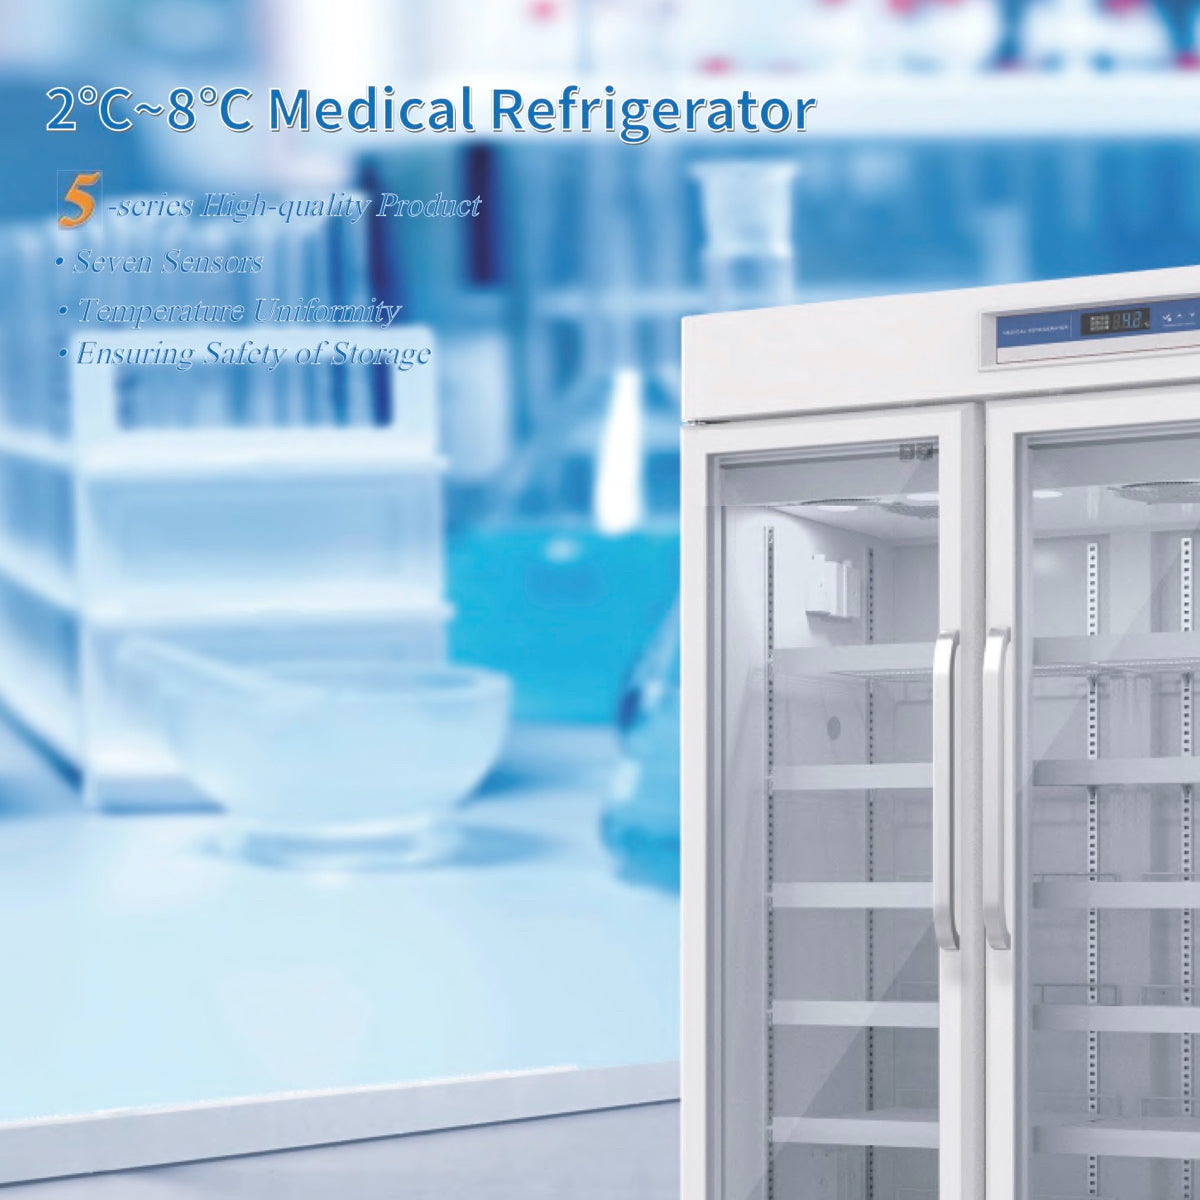 A white medical refrigerator with glass doors and adjustable shelves for high efficient capacity storage.